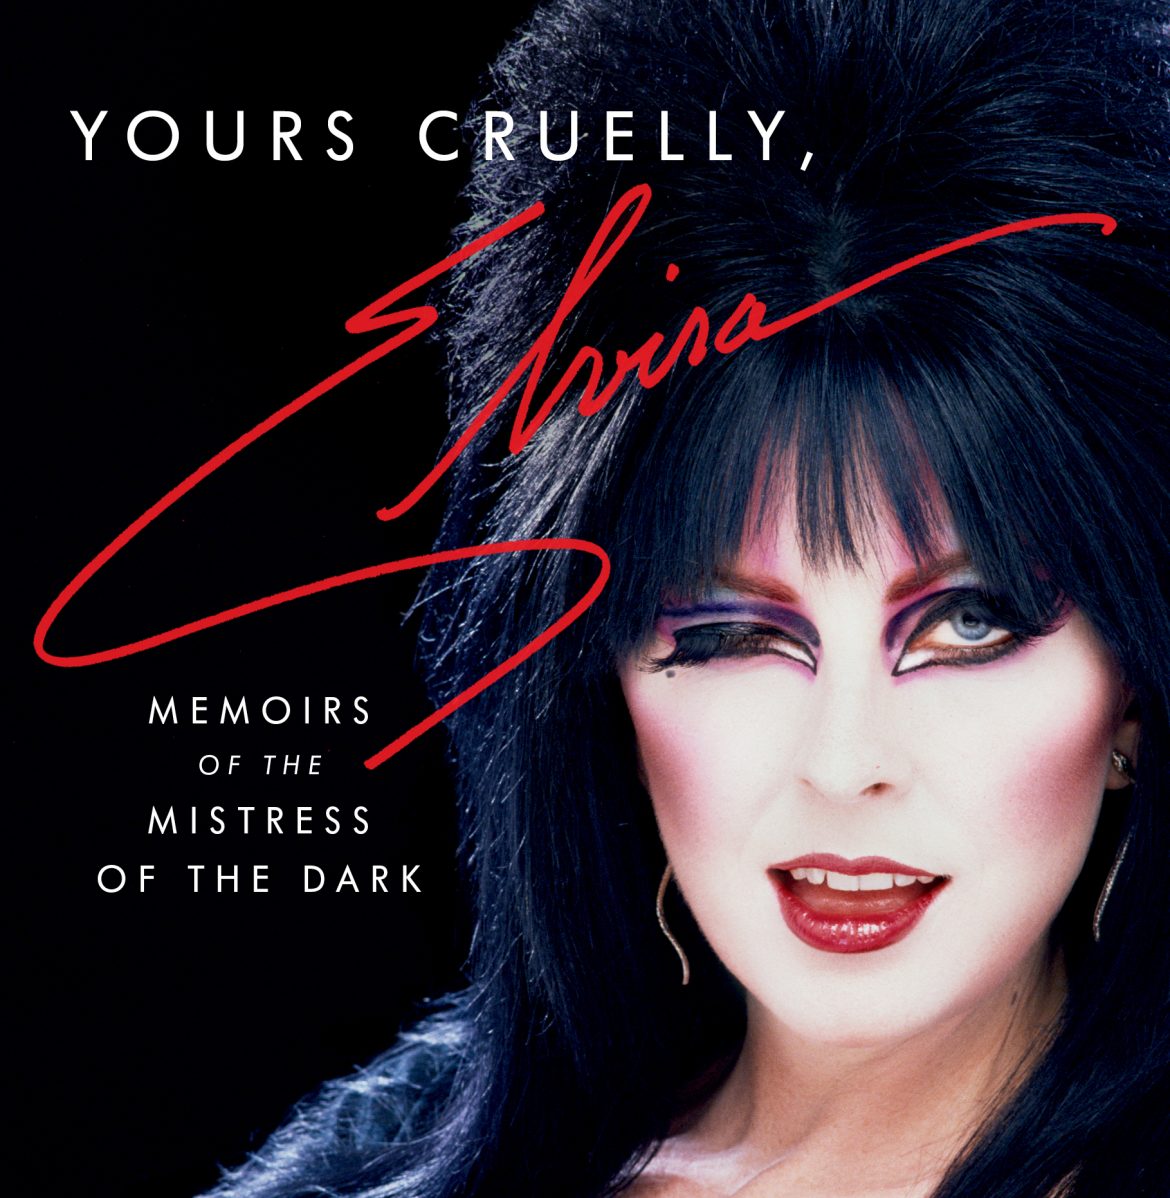 @TheRealElvira released a memoir last year titled Yours Cruelly, Elvira: Memoirs of the Mistress of the Dark, where she shares personal & intimate tales of her life. @PASSPORTmag was able to talk with Peterson about her career, horror movies, & coming out: bit.ly/3zVg9fa